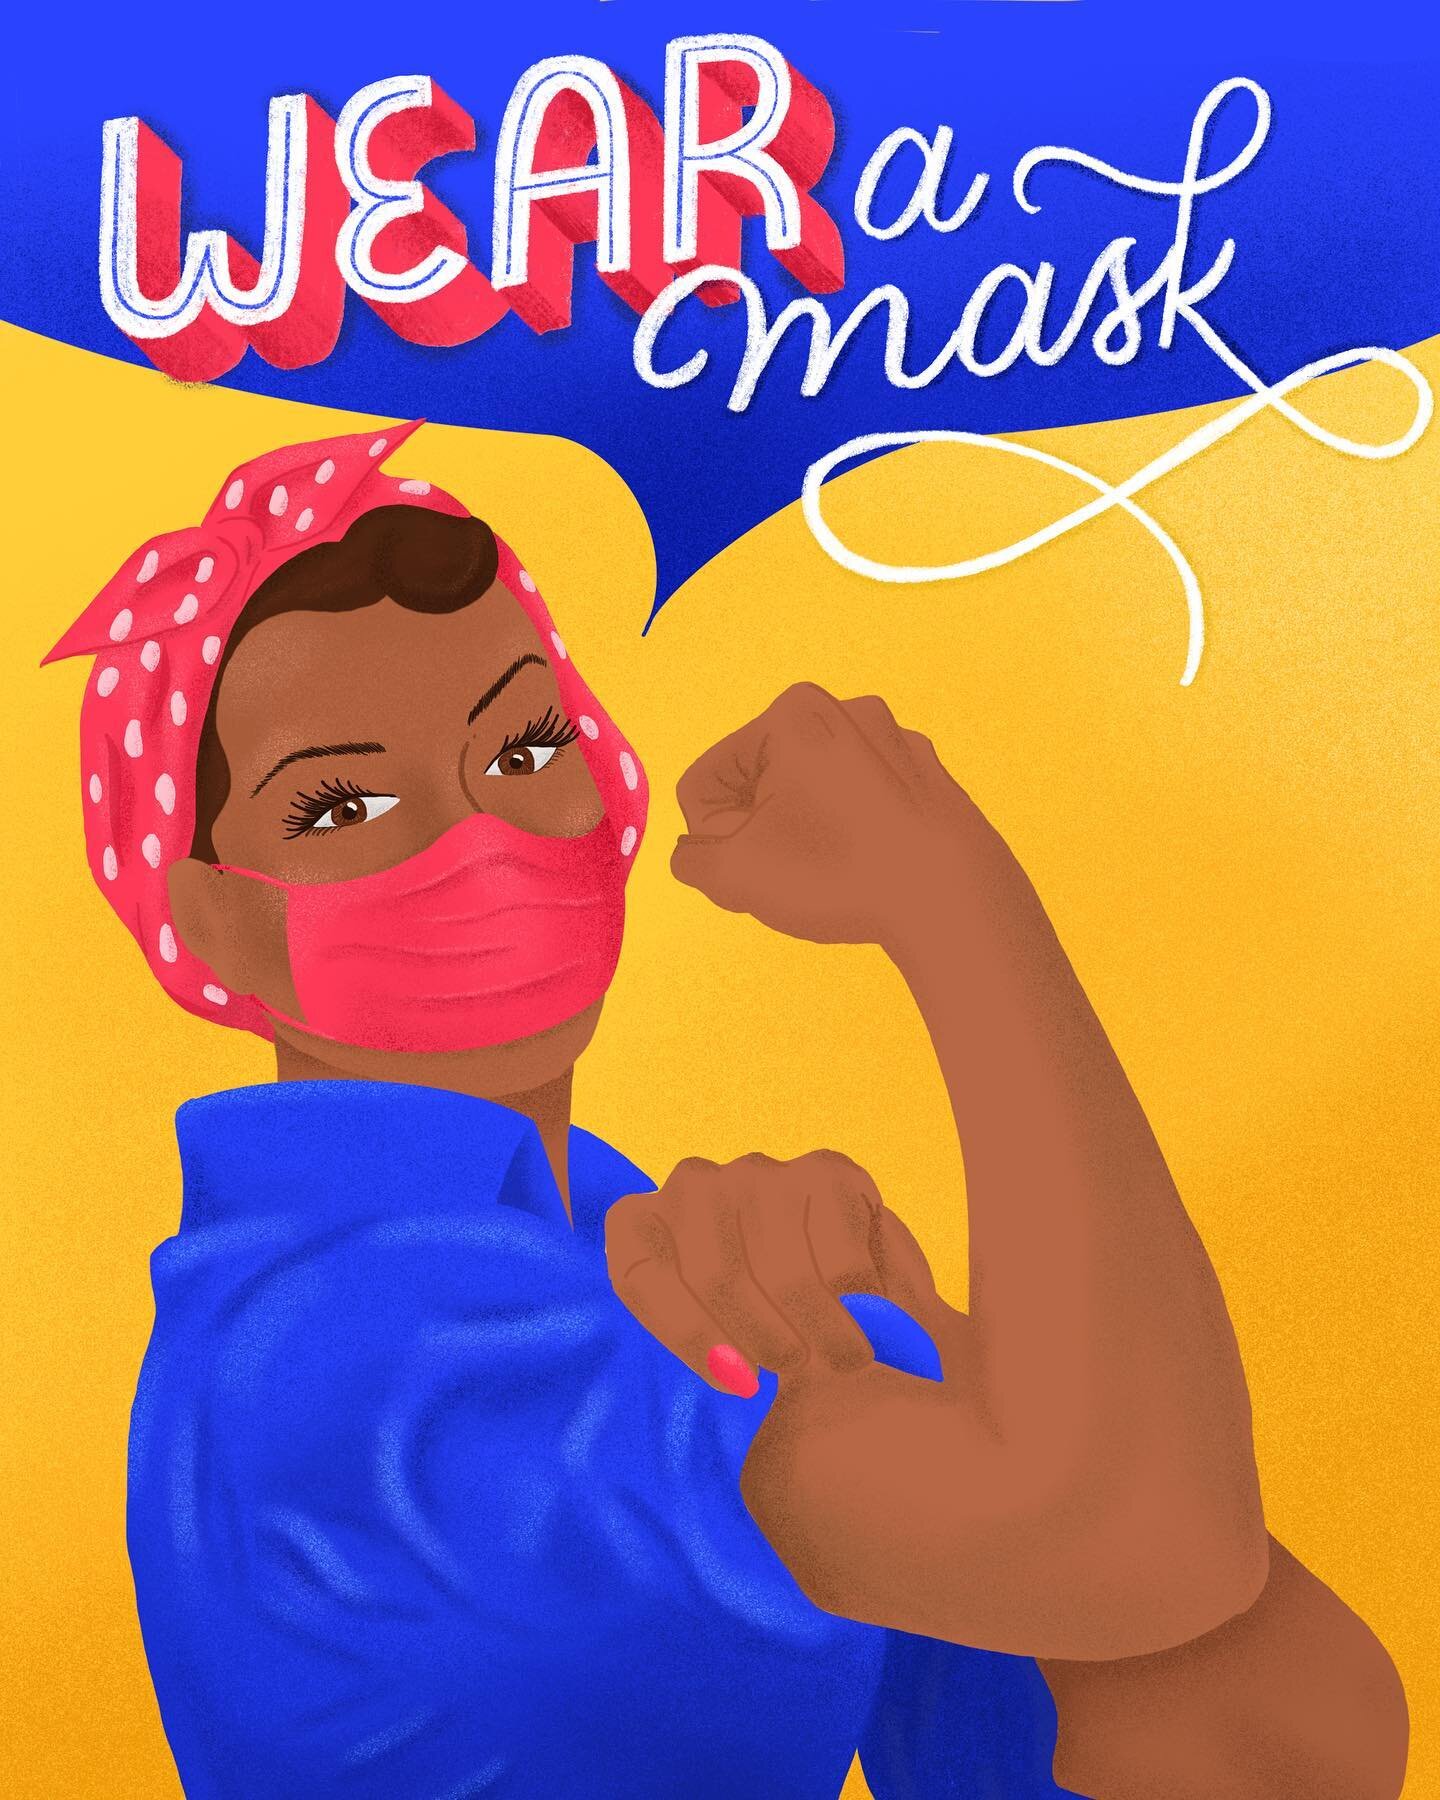 We can do it! Wear a mask! #rosietheriveter 

[...]
.
.
.
.
#handlettering #lettering #type #handtype #goodtype #designspiration #graphicdesign #typematters #dailytype #design #designspiration #handdrawntype #designeveryday #showusyourtype #weareinth